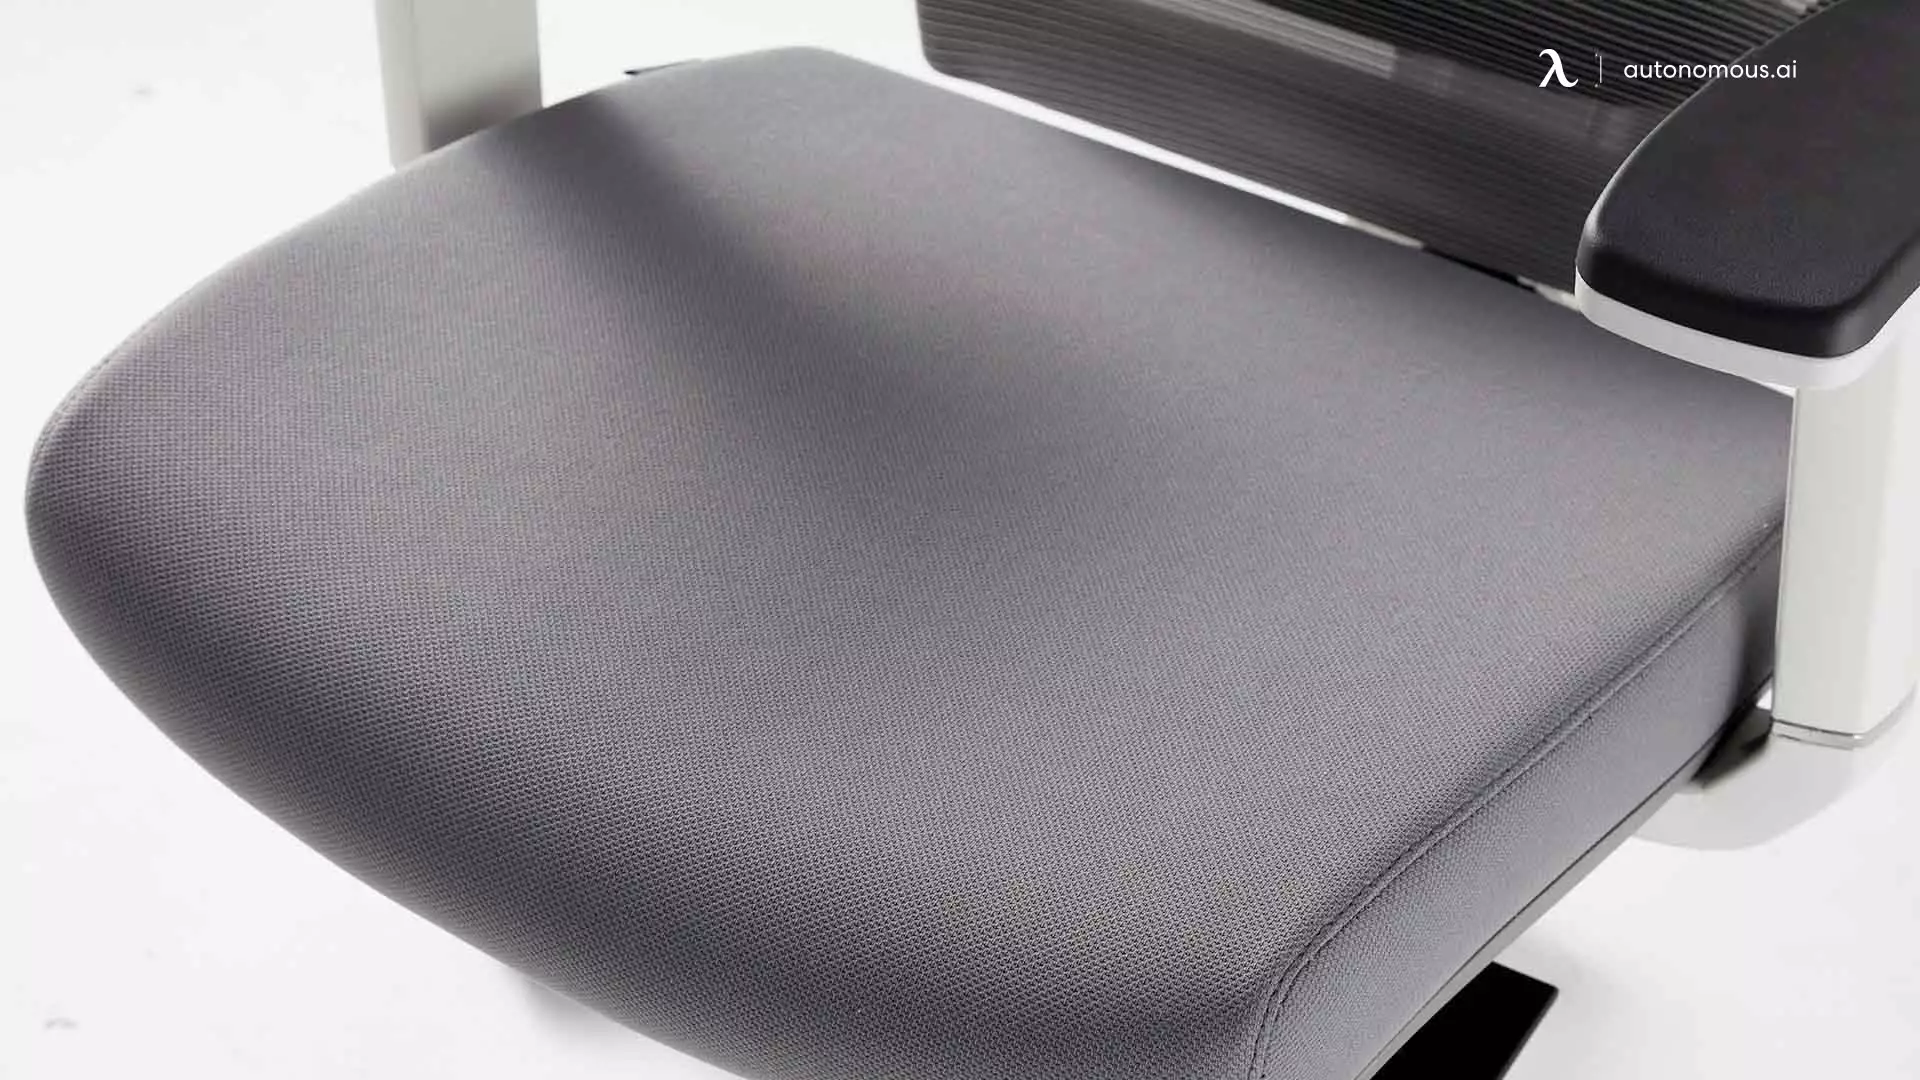 What Is The Best Way To Choose An Office Chair Seat Cover?